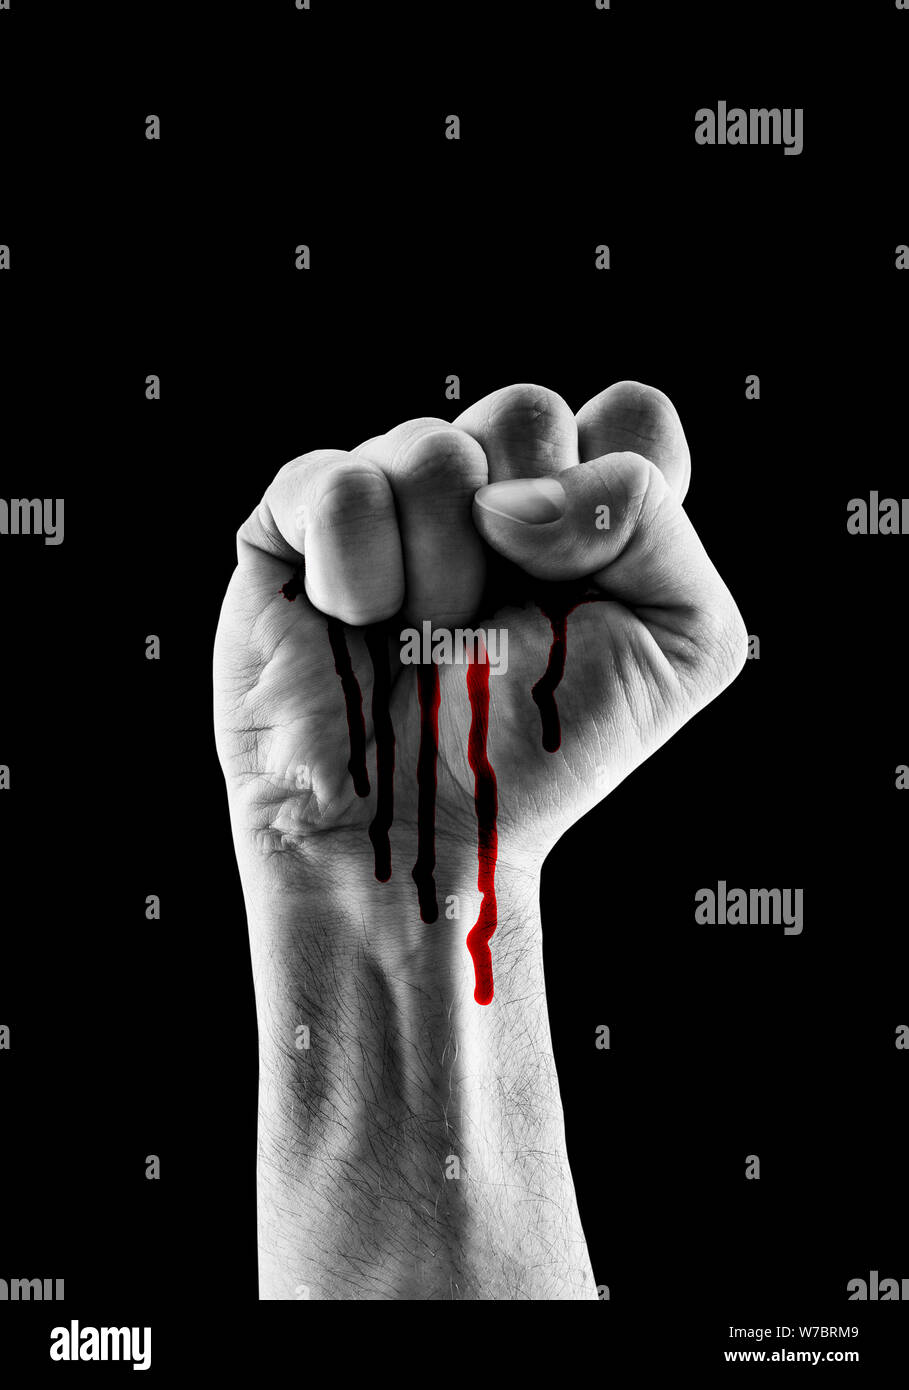 Raised hand showing fist with red blood isolated on black background Stock Photo